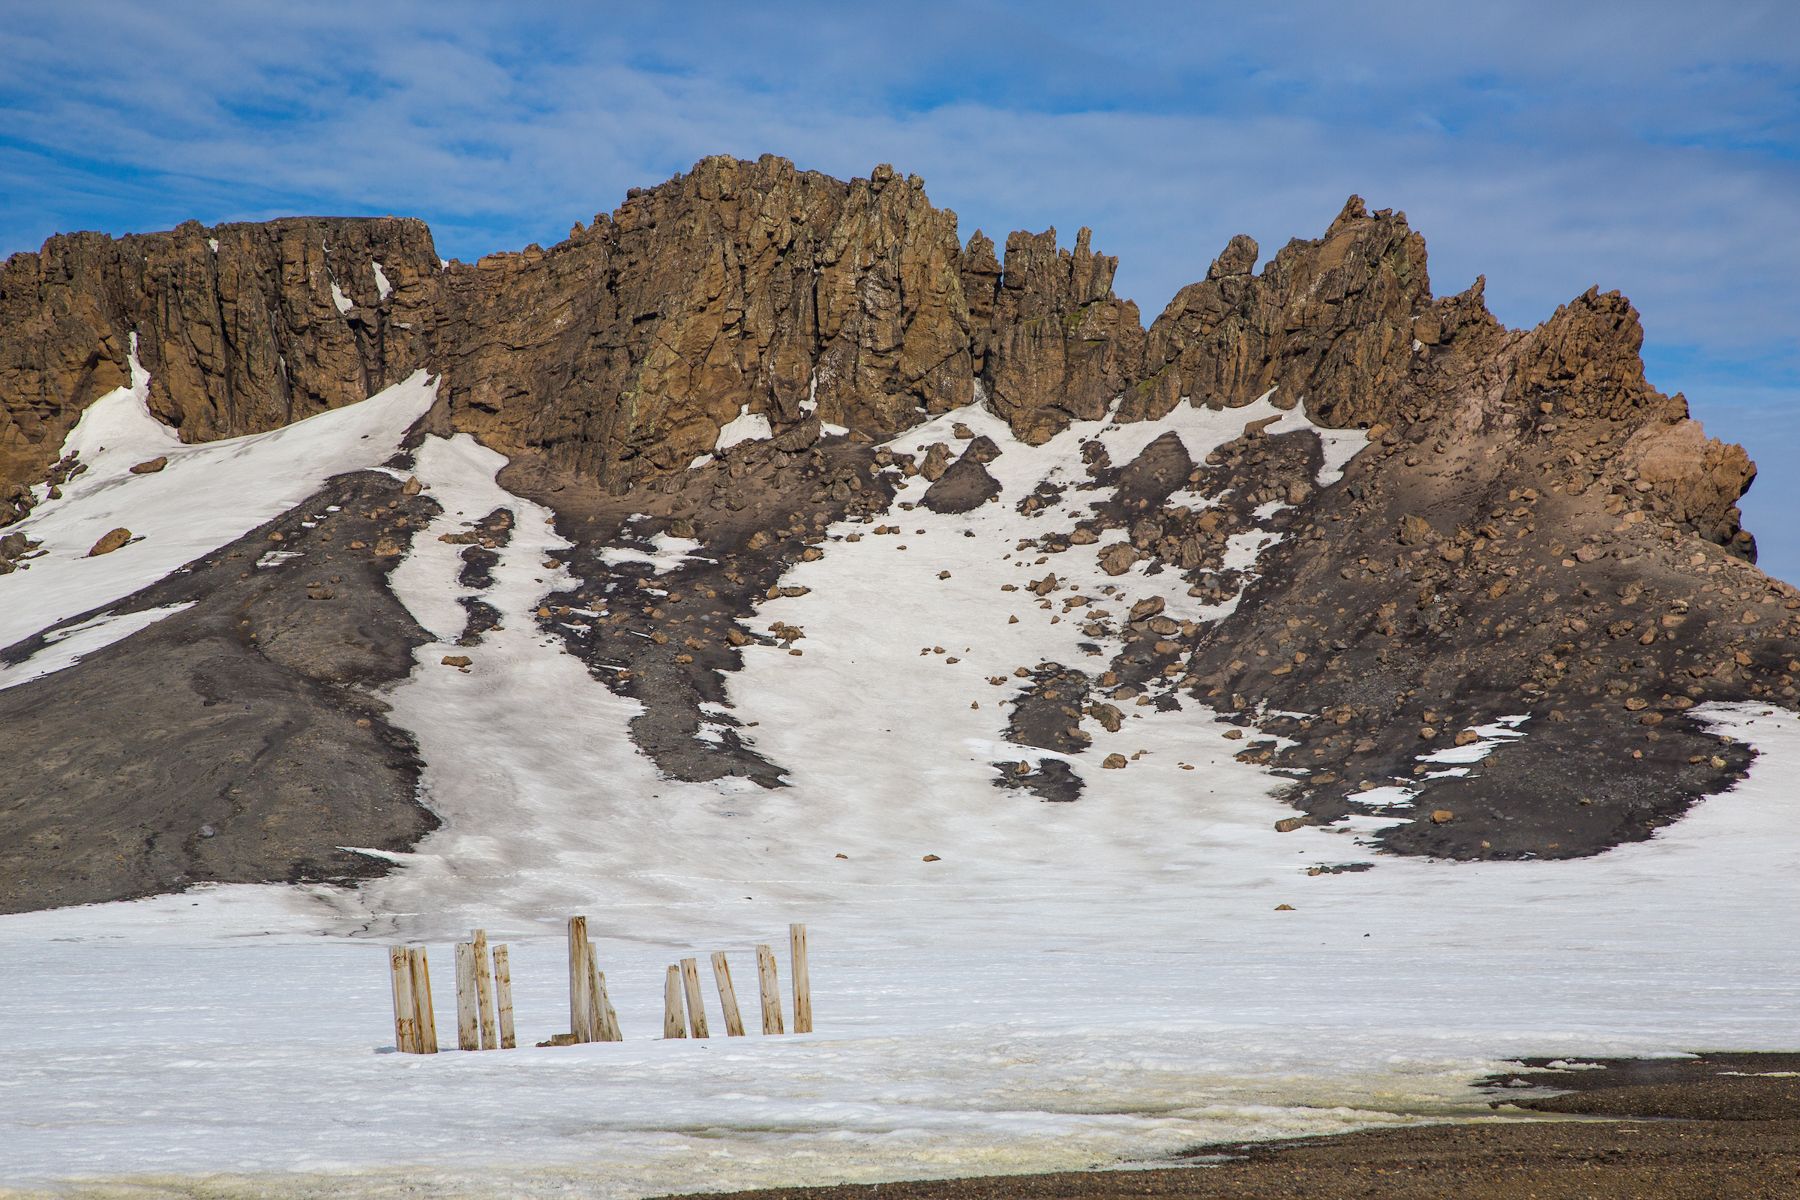 The remains of the whaling station on Deception Island, Antarctica